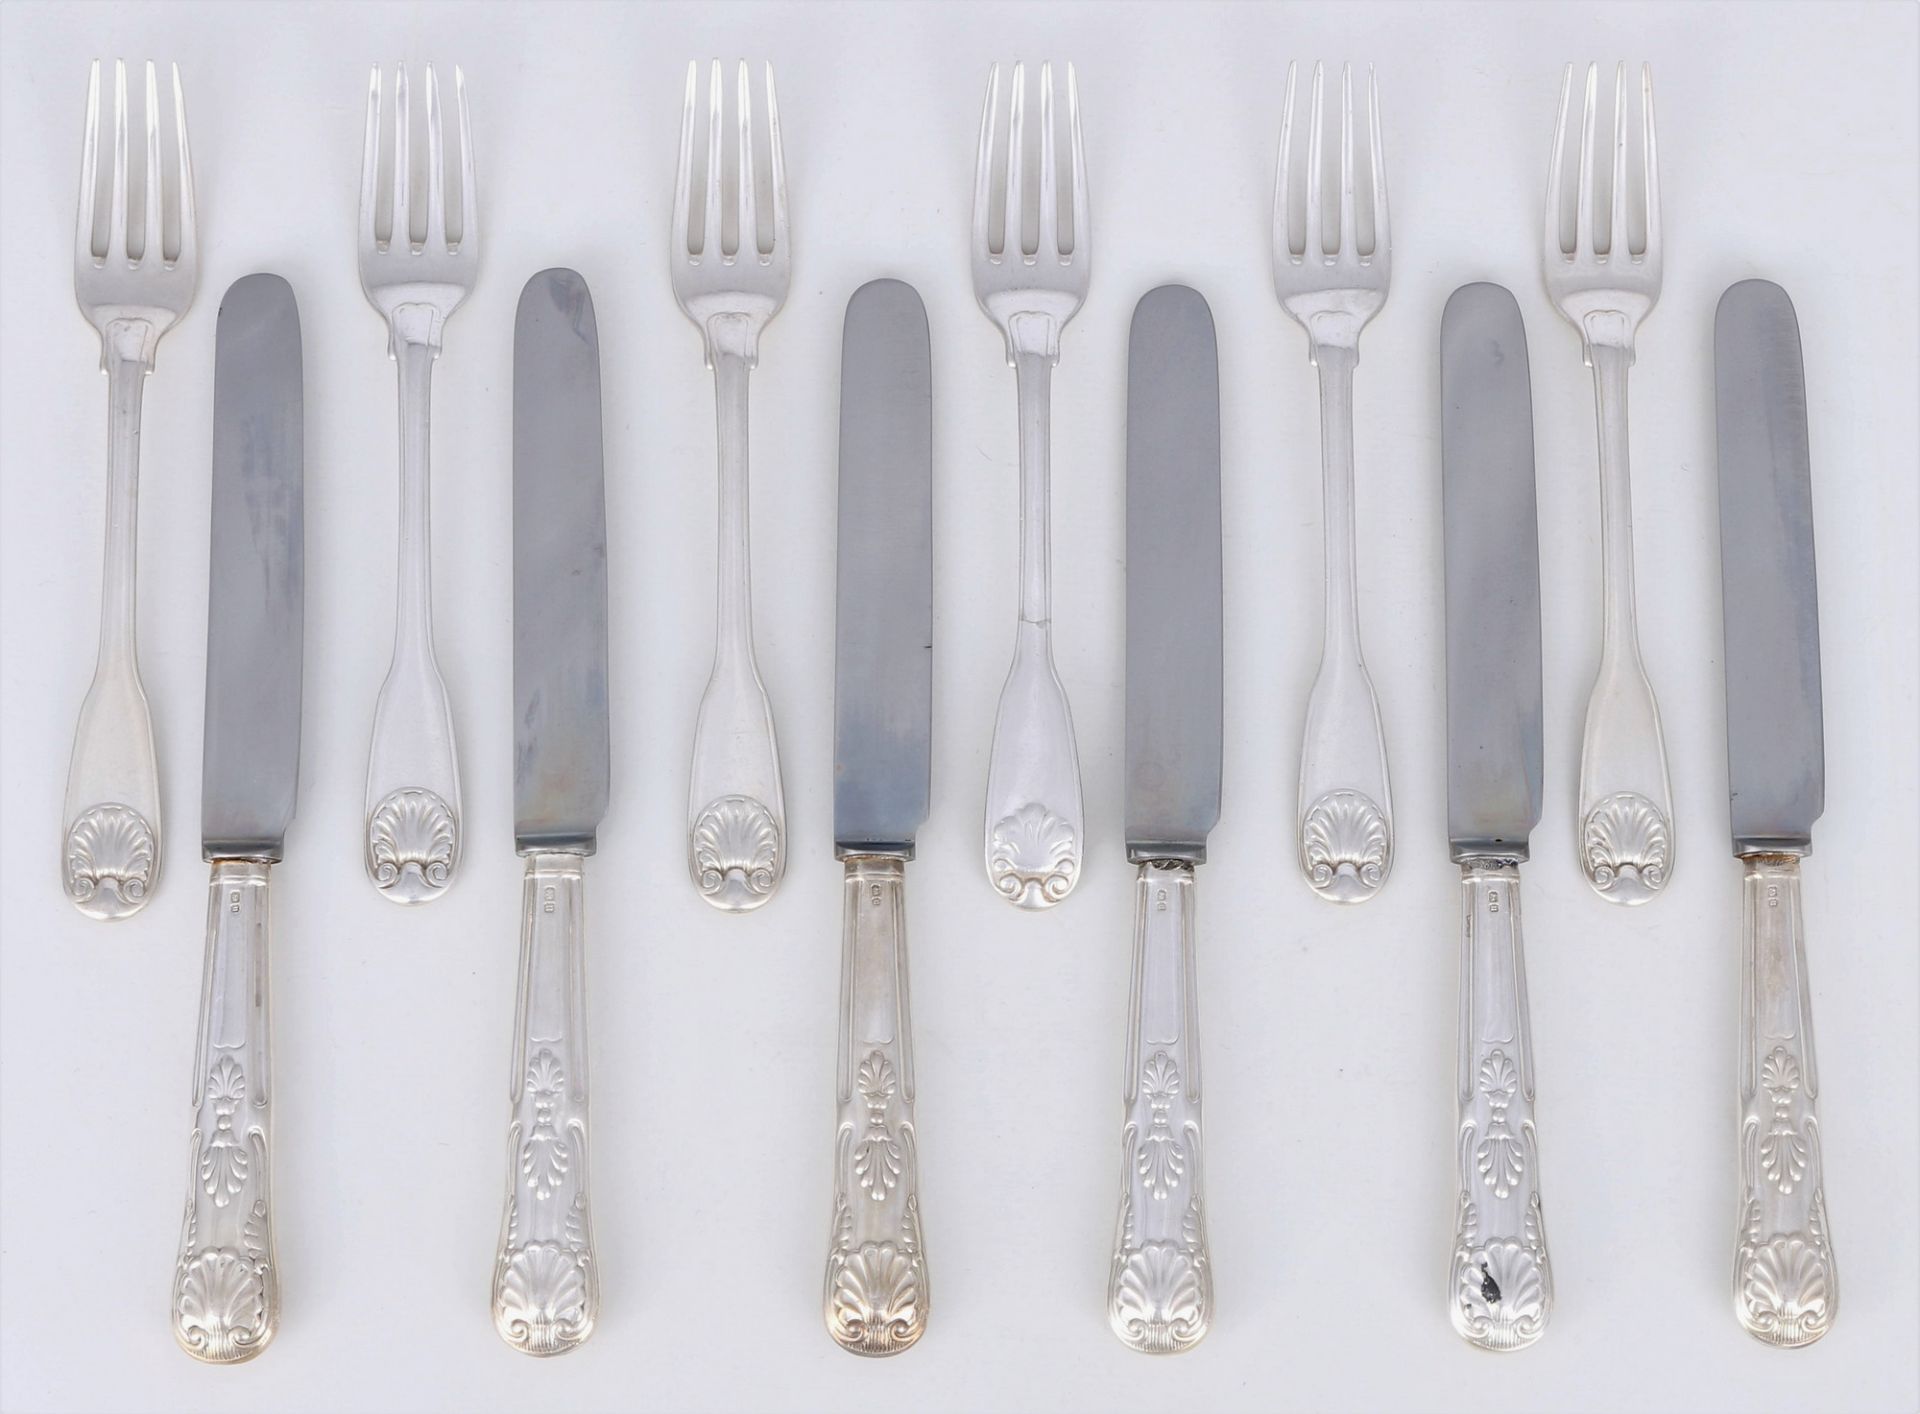 925 sterling silver cutlery set for 6 person, Mappin & Webb England from 1912, Silber Menügabeln & M